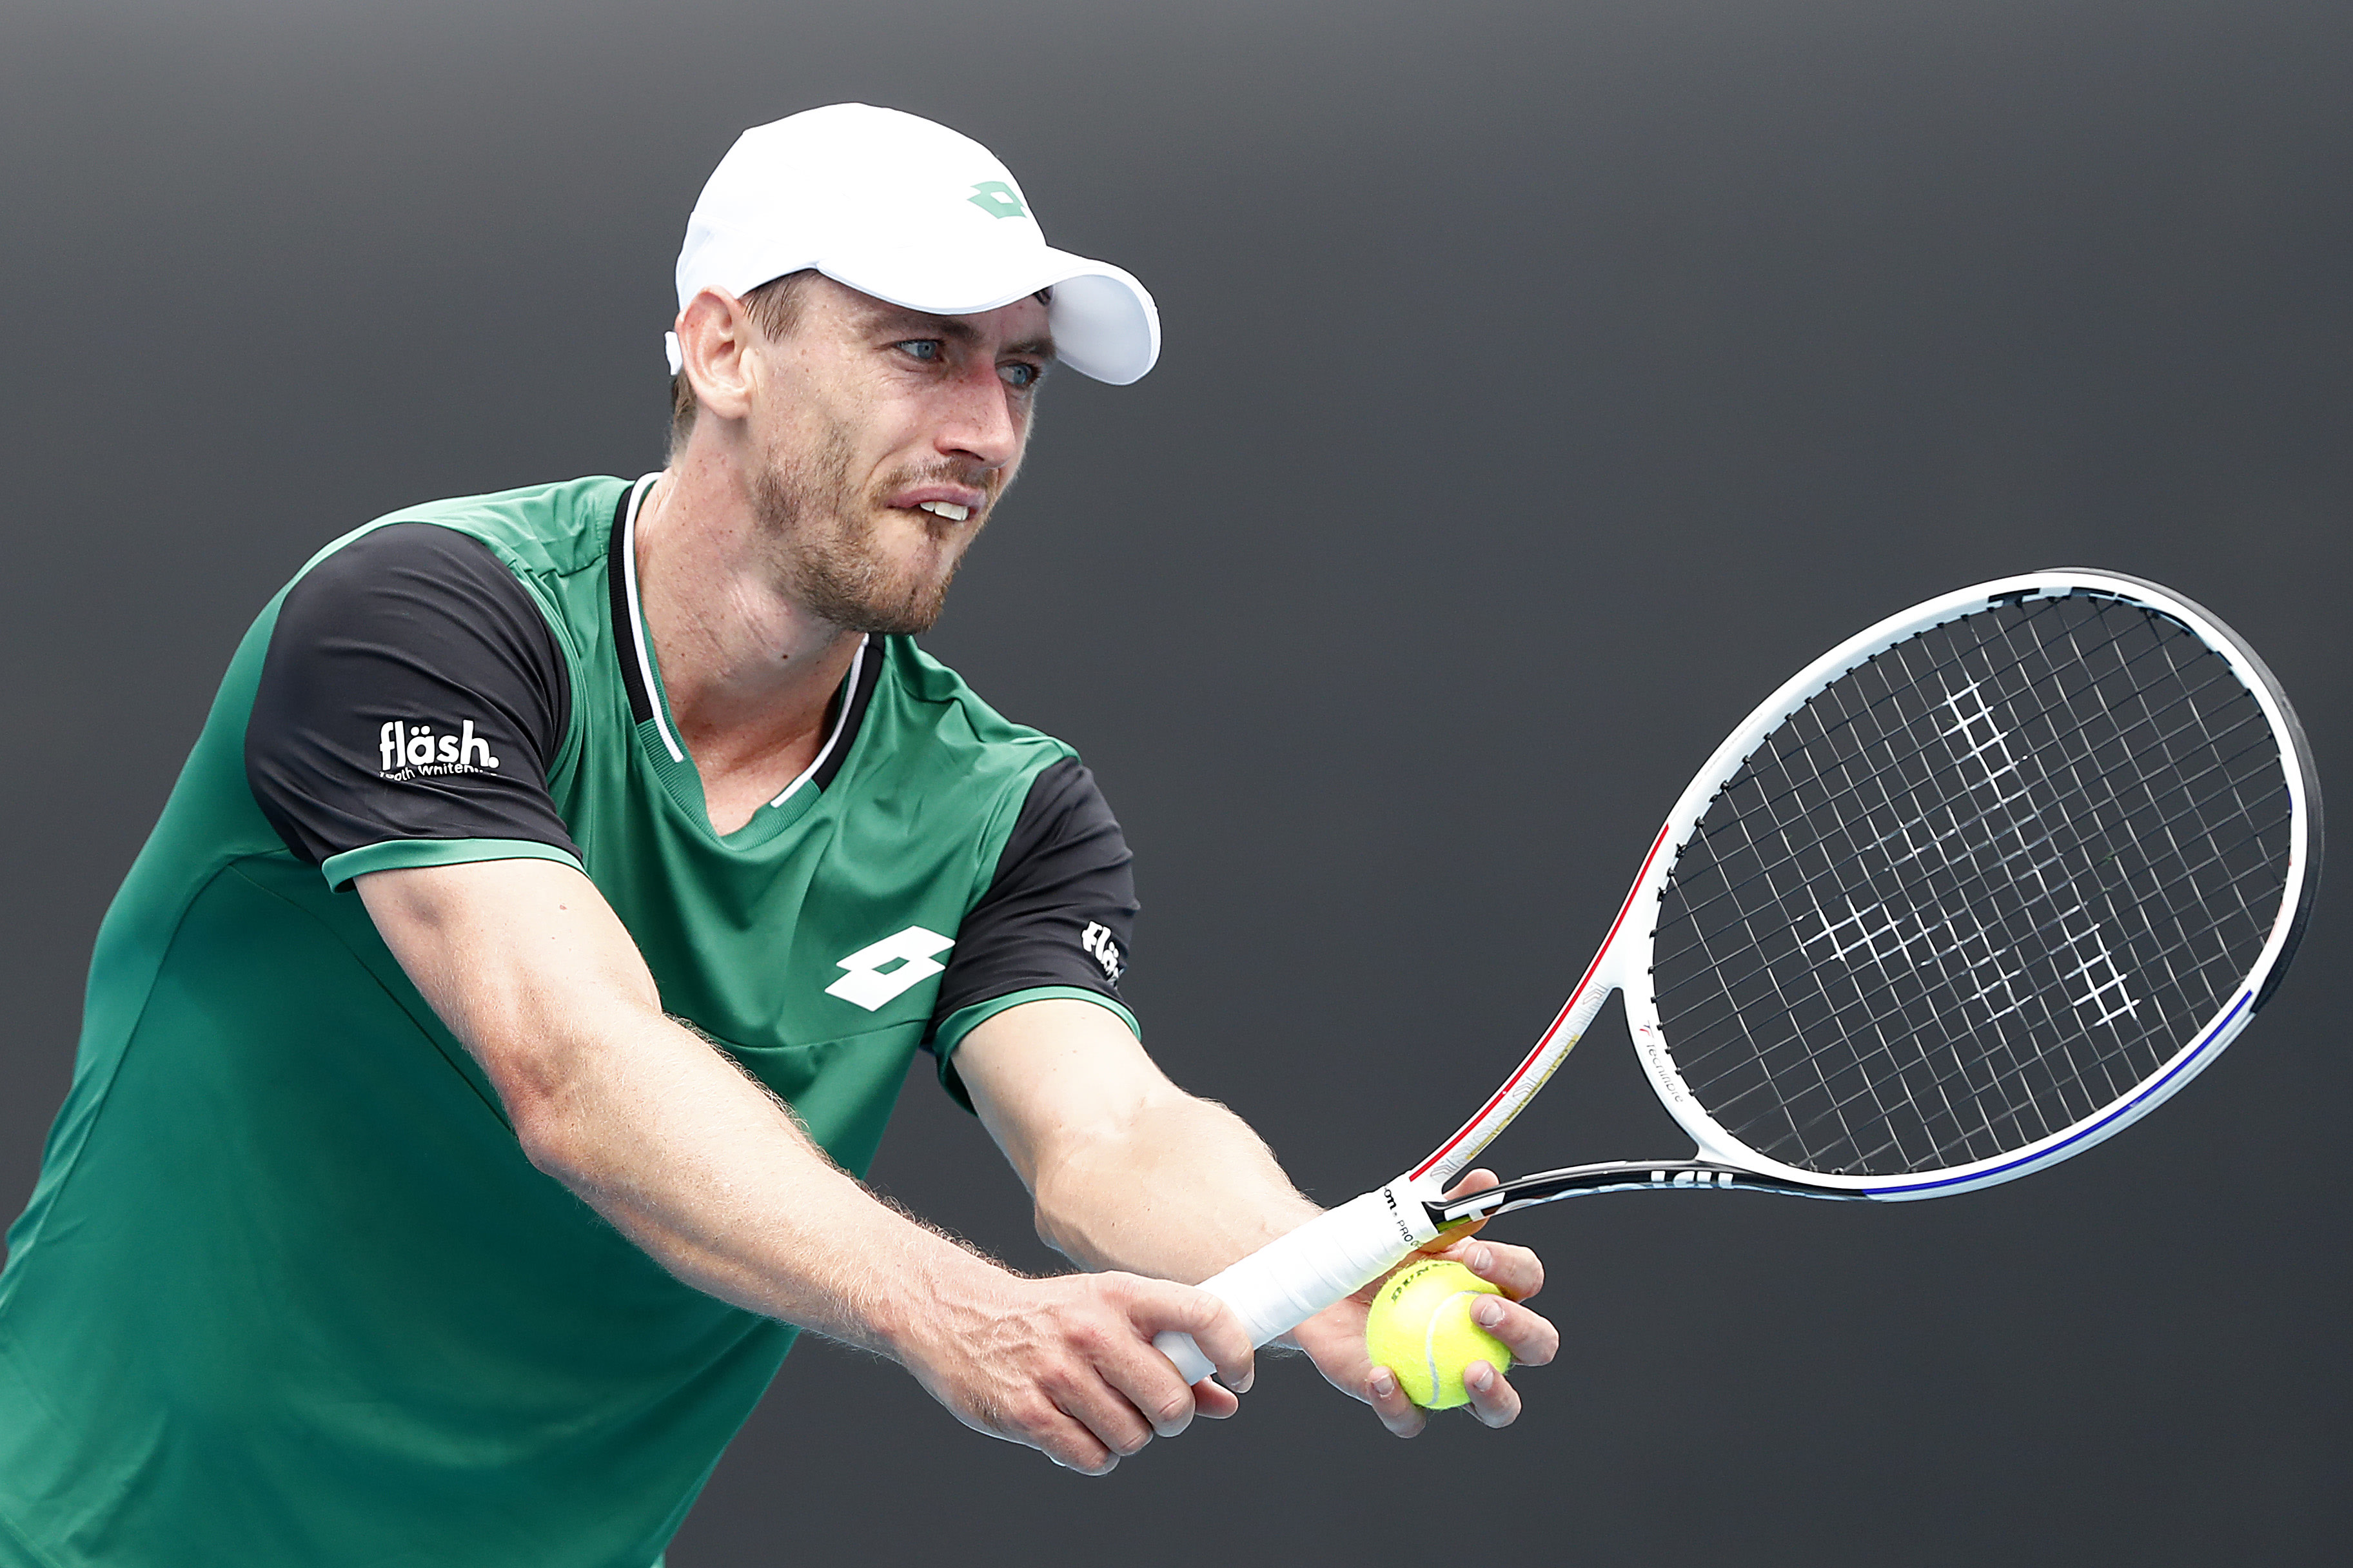 Aussie John Millman believes most unvaccinated players would agree to 14-day quarantine in order to play Australian Open